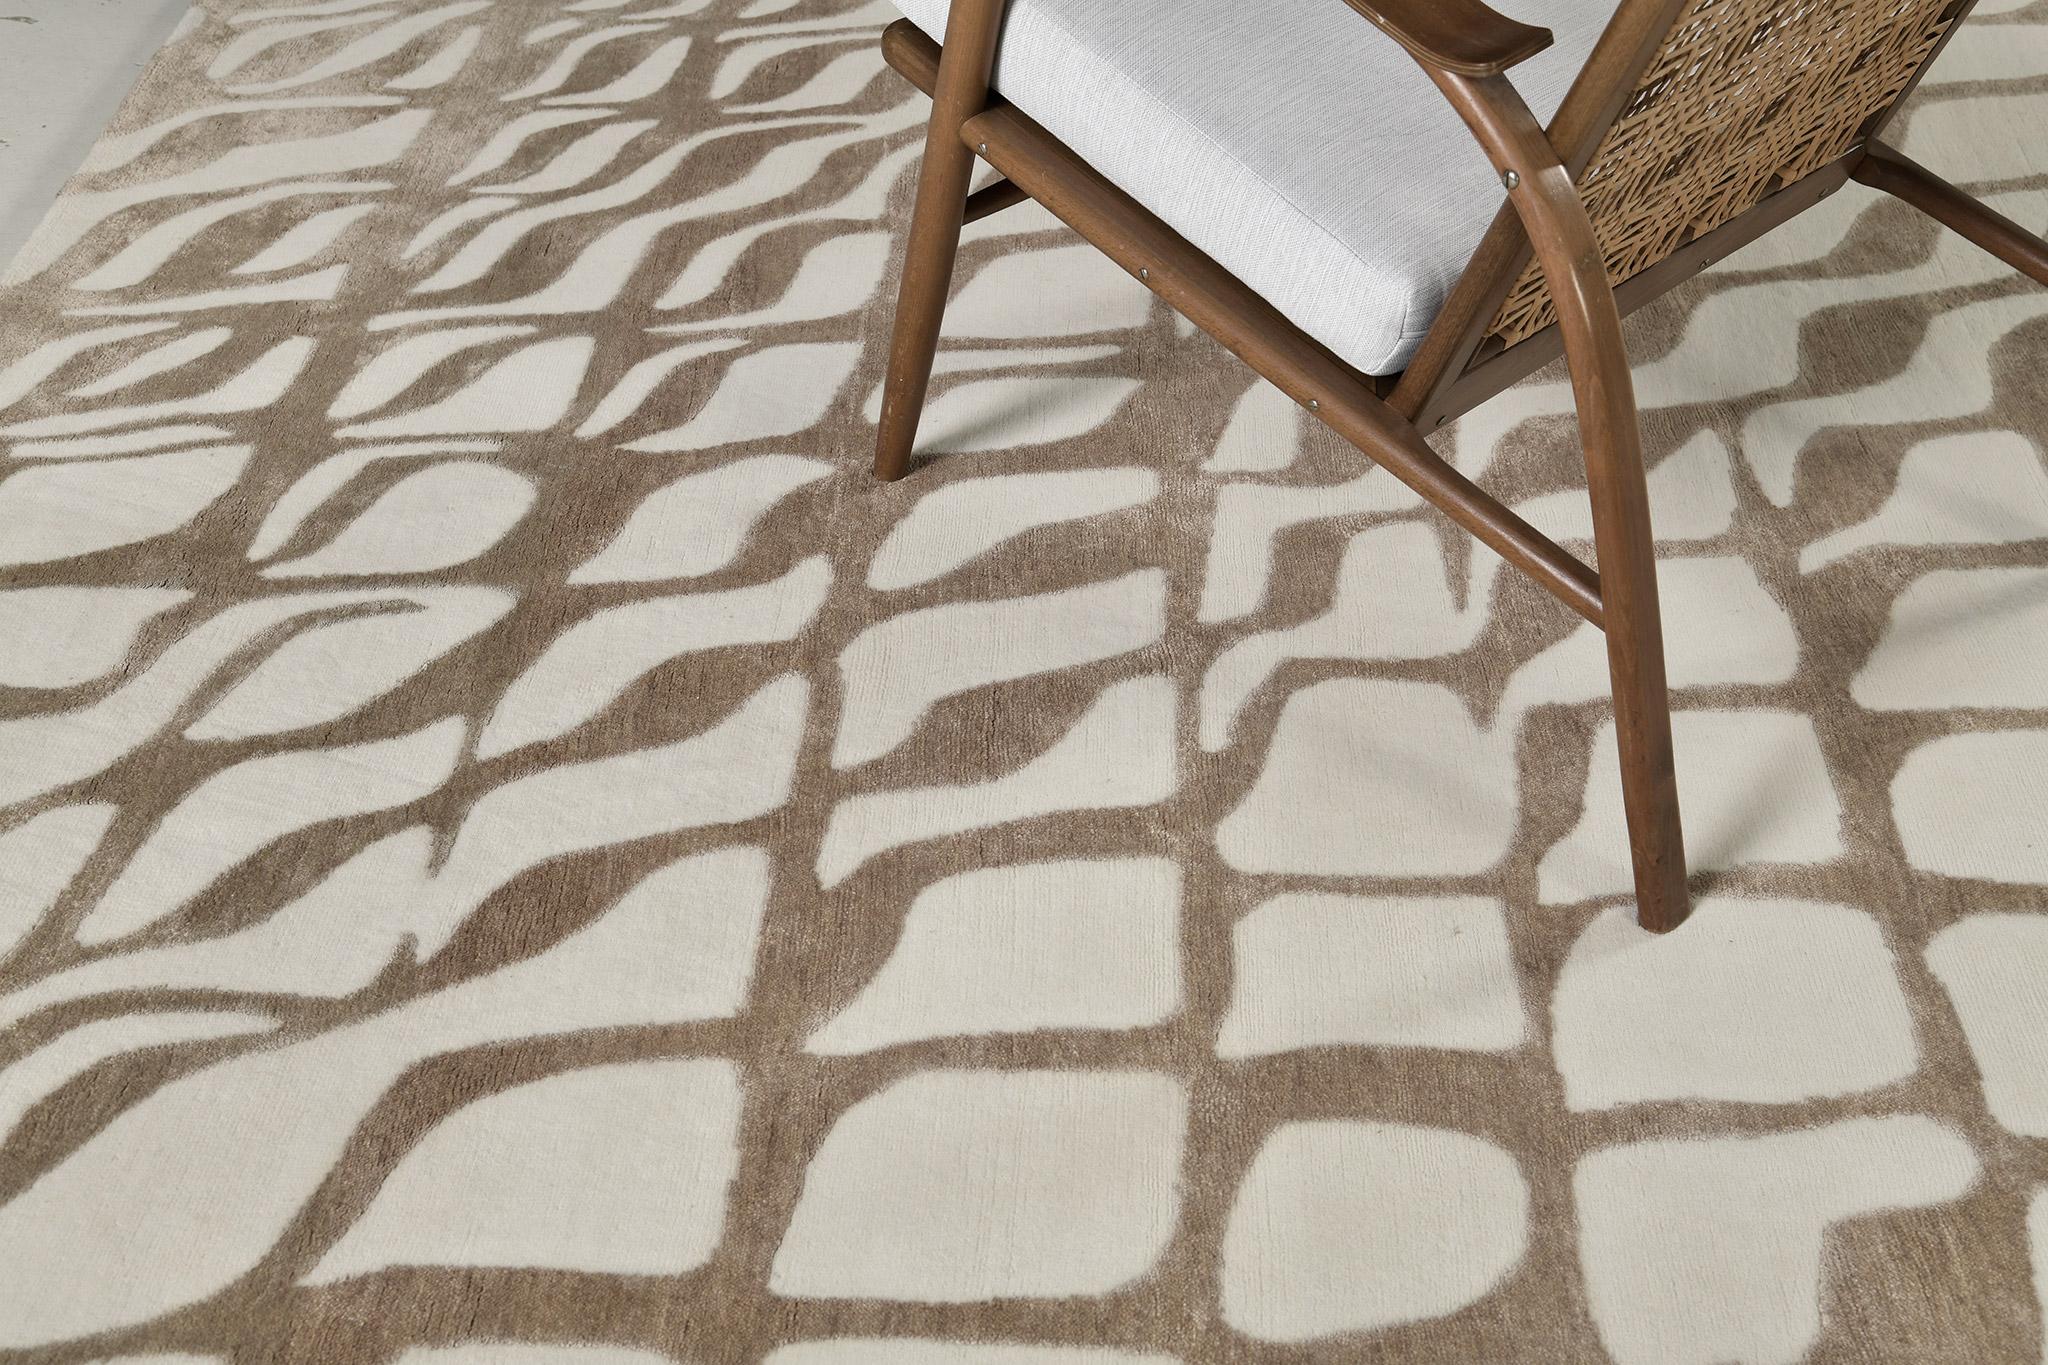 Calacatta is a neutral-toned elegant wool and silk embossed rug. A part of the Design Rhymes Collection which pulls inspiration from various aspects of architecture. Calacatta has been a darling in California amongst interior designers and